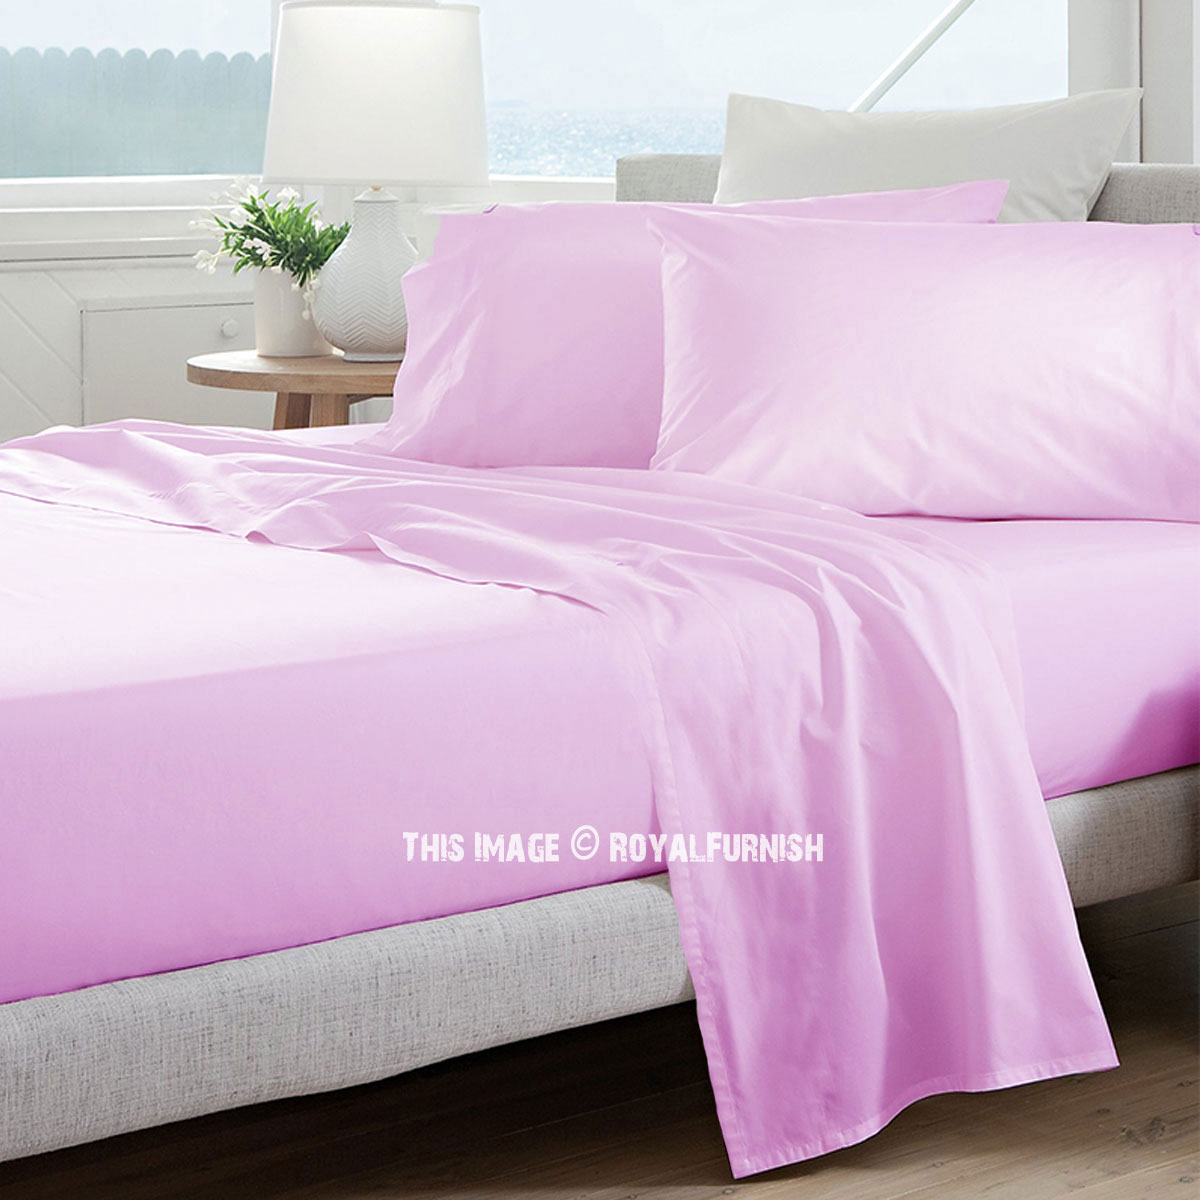 50/50 POLYCOTTON SIZE SINGLE BABY PINK FITTED BED SHEET WRINKLE FREE 